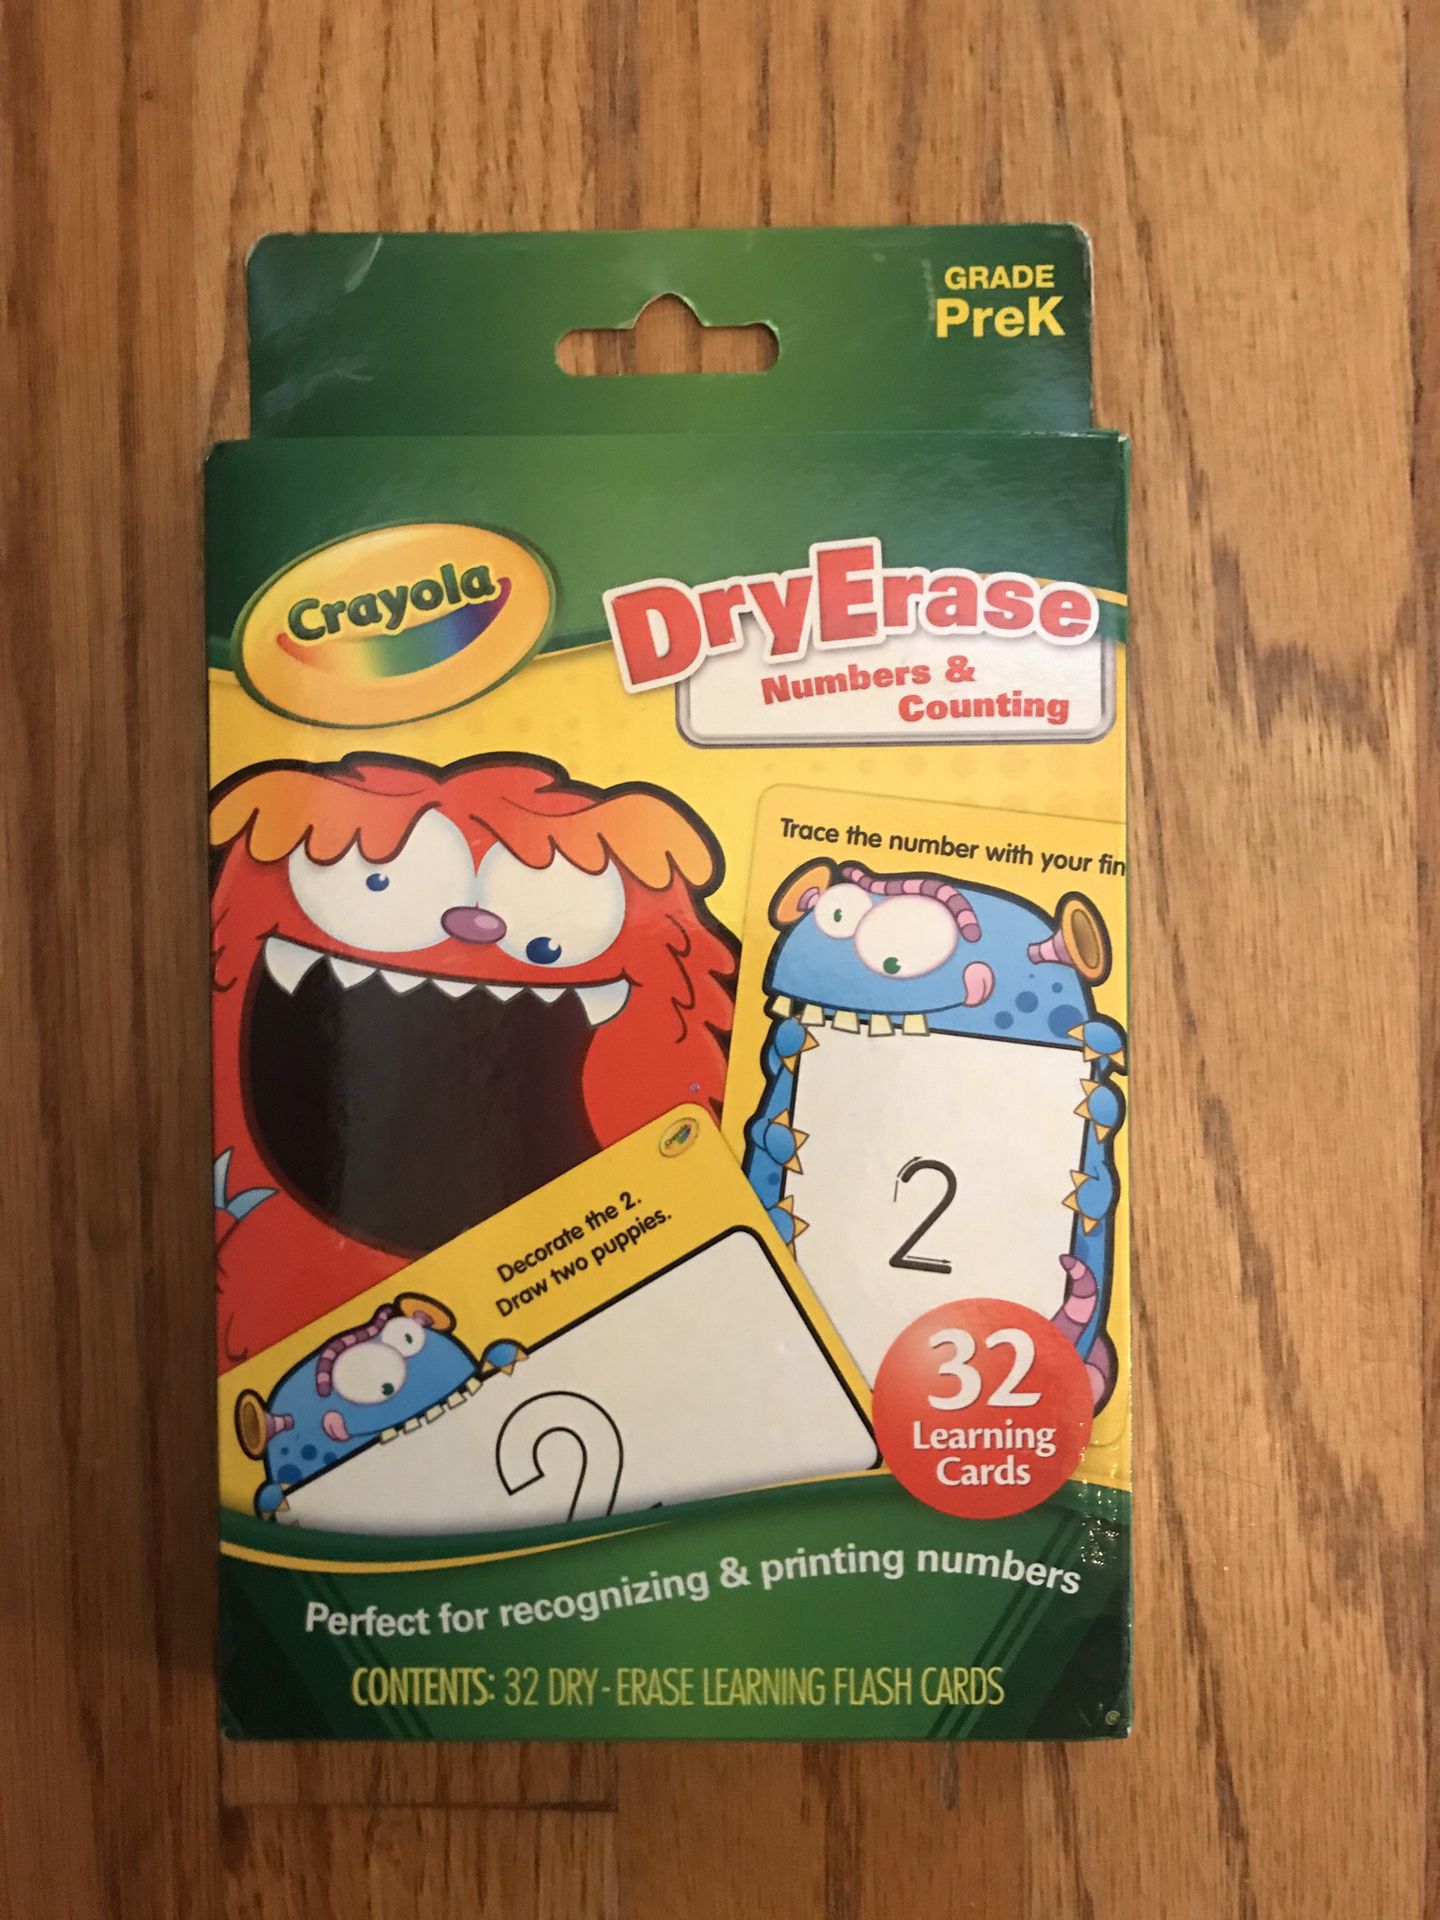 NEW Crayola Dry Erase Numbers and Counting Flash Cards